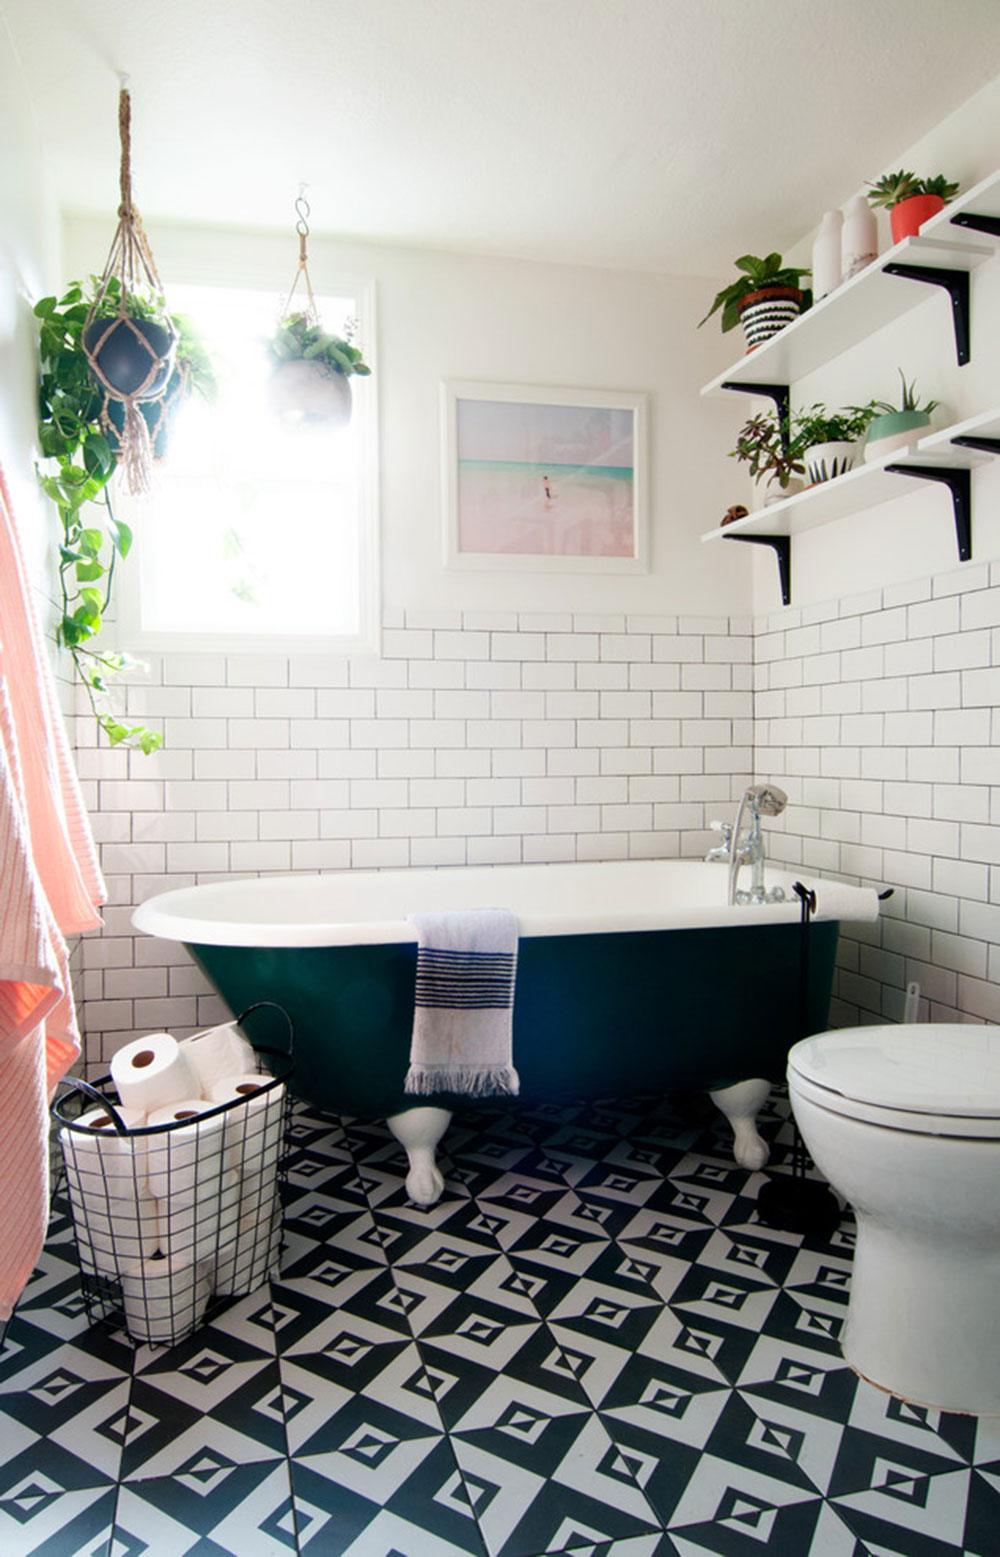 My-Houzz-Eclectic-Bohemian-Style-in-a-1976-Fixer-Upper-by-Alexandra-Crafton The definitive guide on how to decorate a bathroom